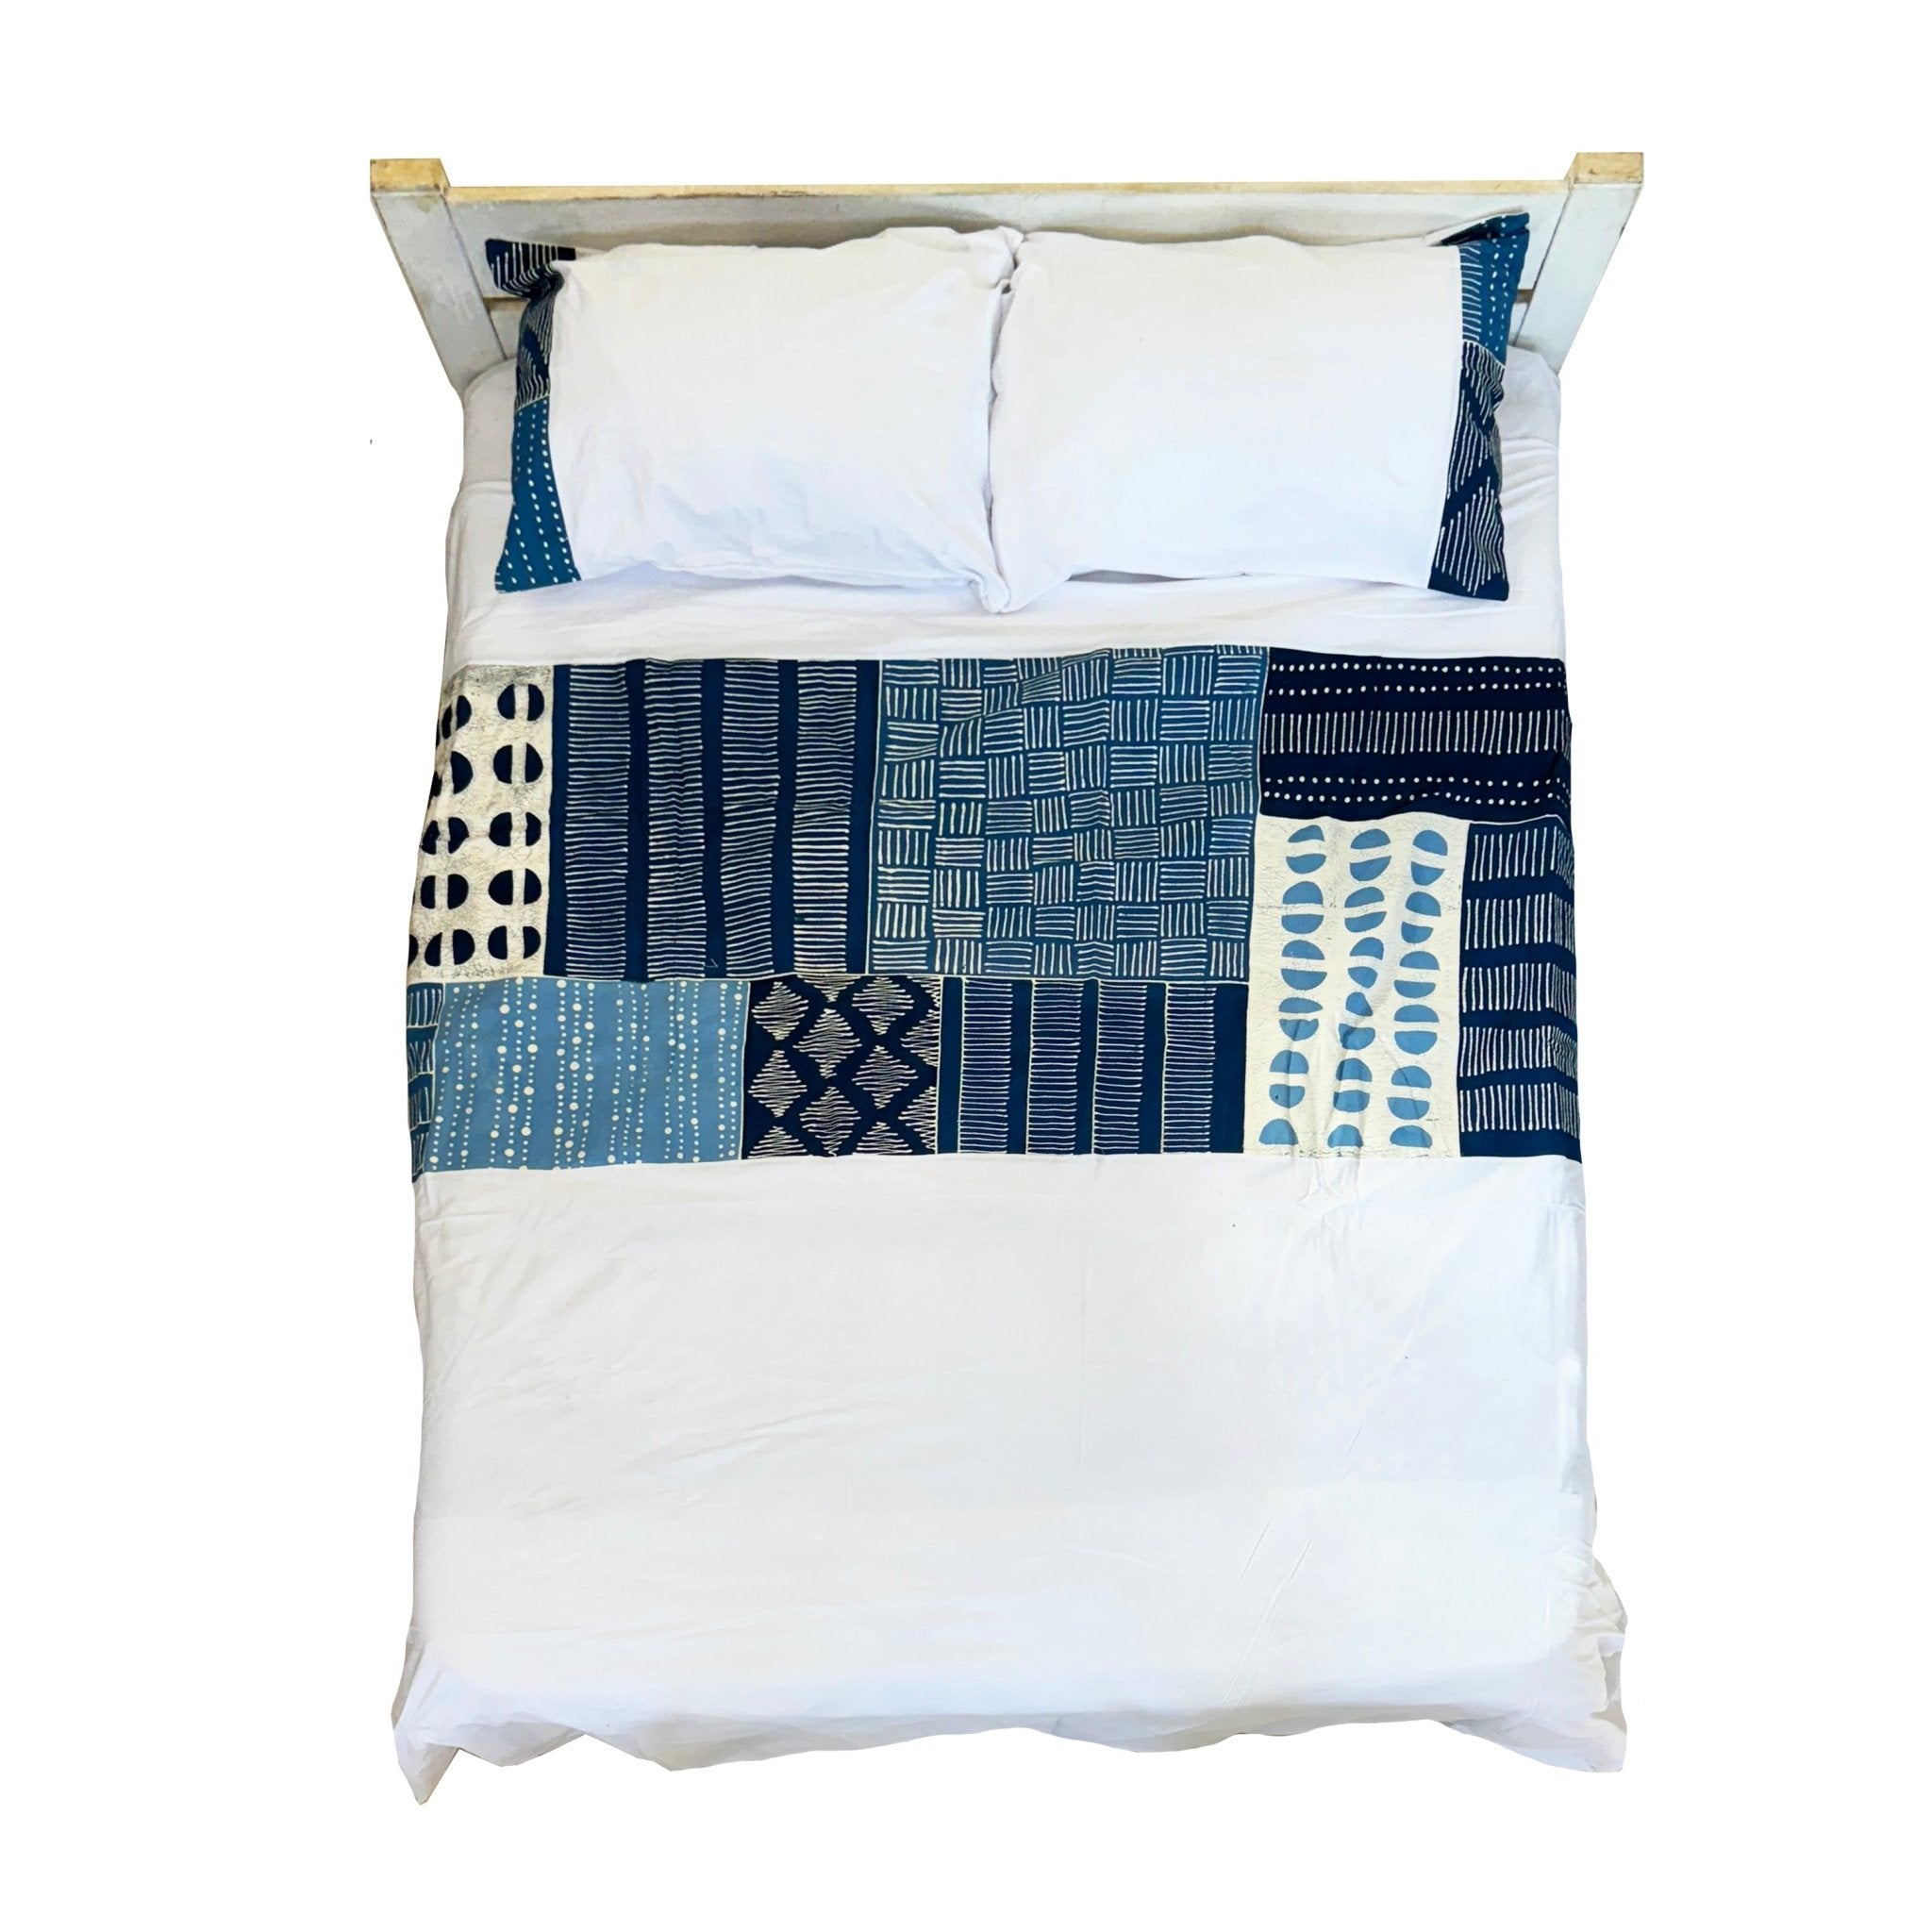 African made indigo duvet cover, is the perfect bohemian addition to your fashionable and sustainable bedroom.